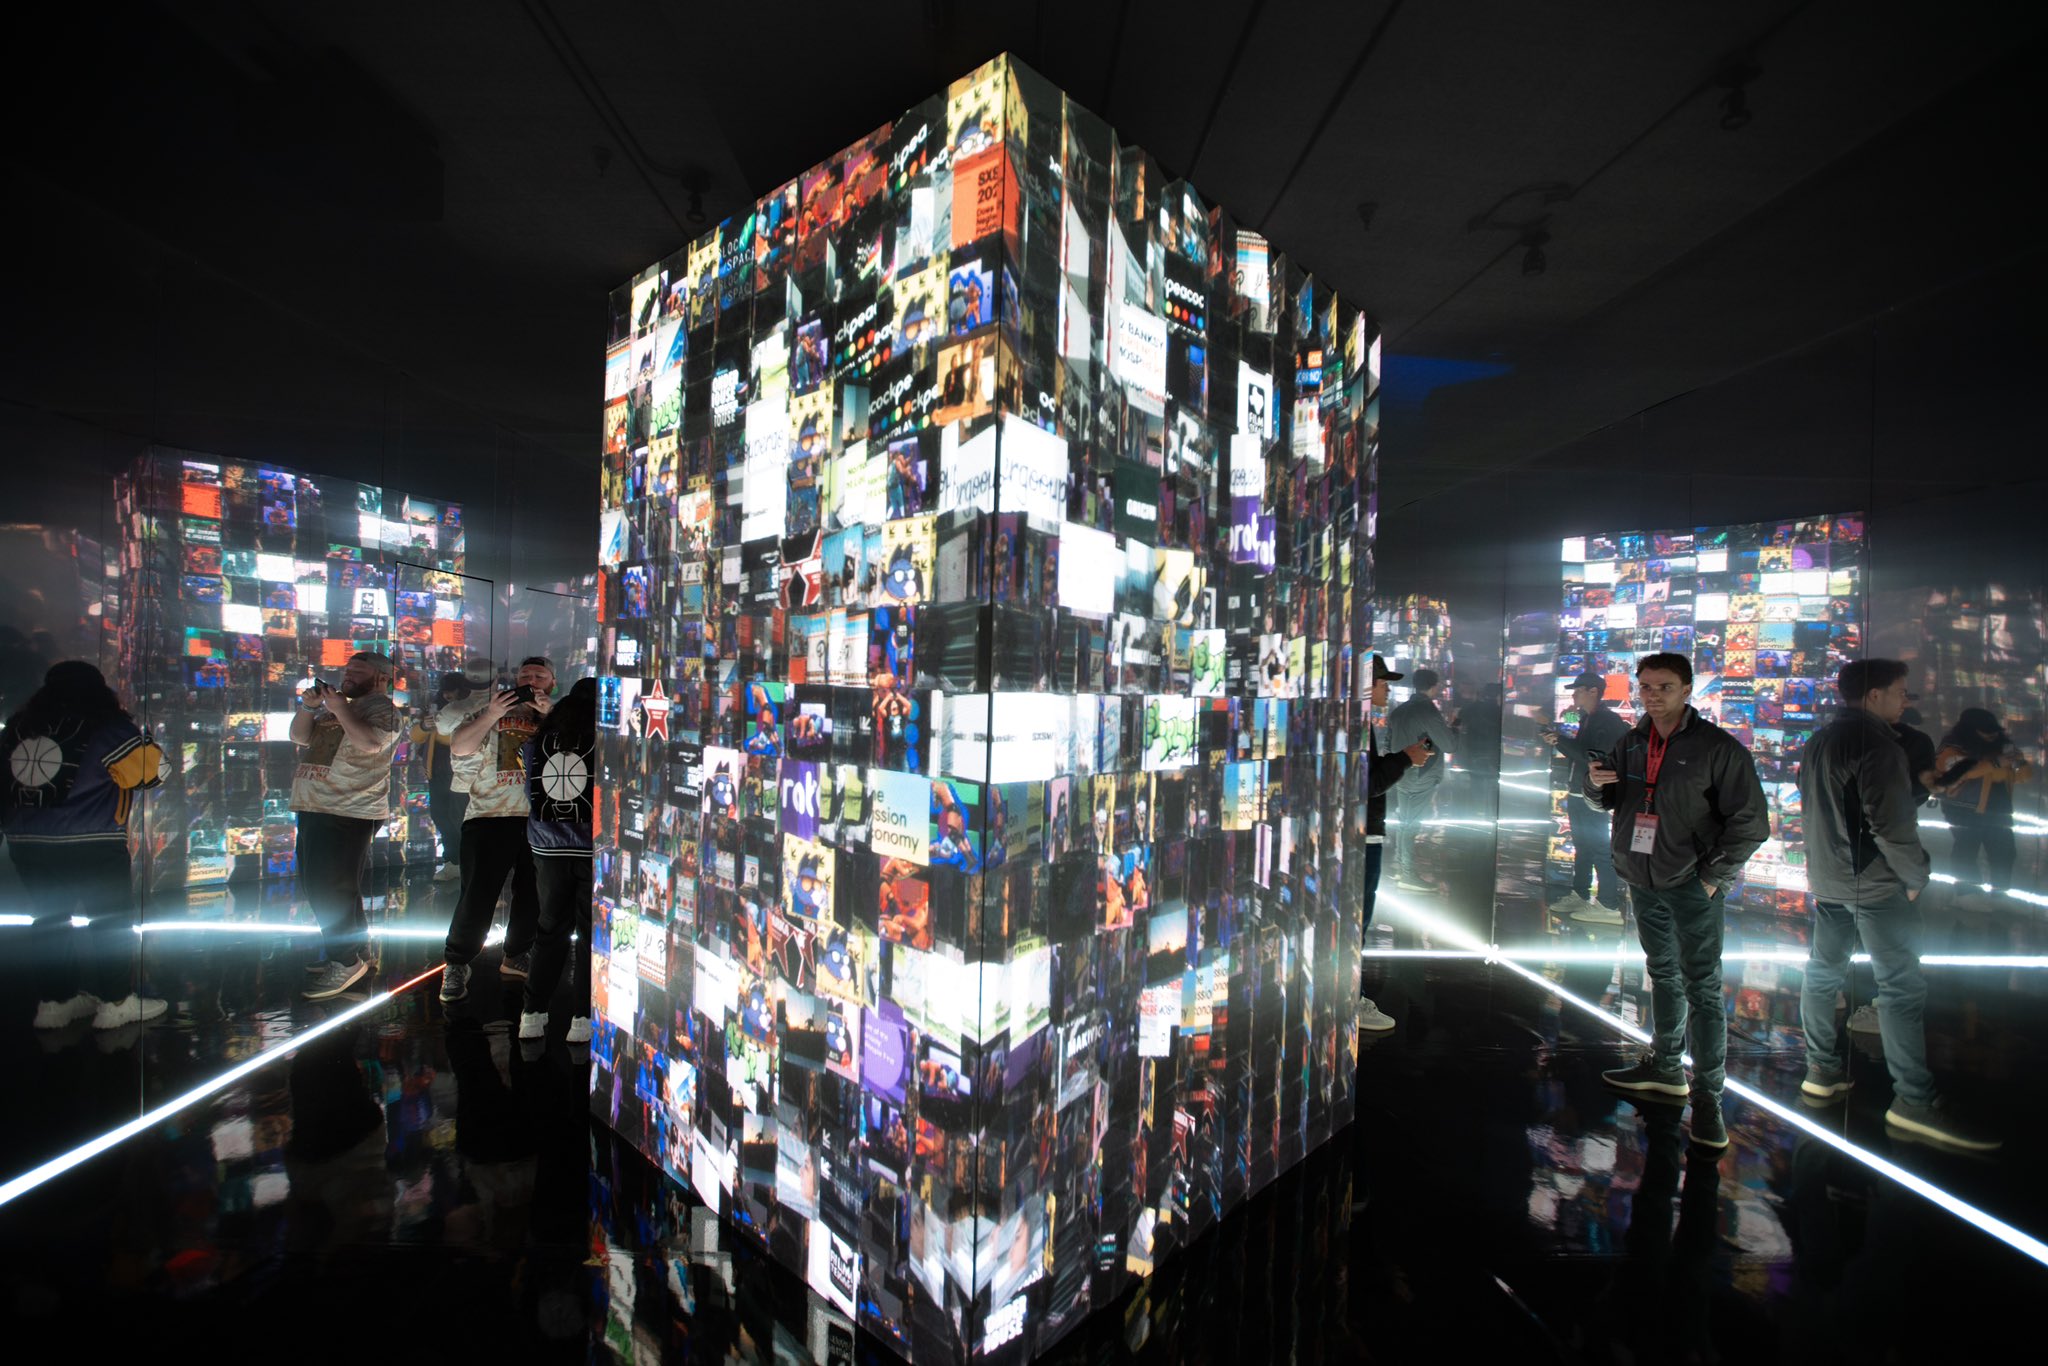 interactive art installation, dark infinity mirror room with persons silhouette